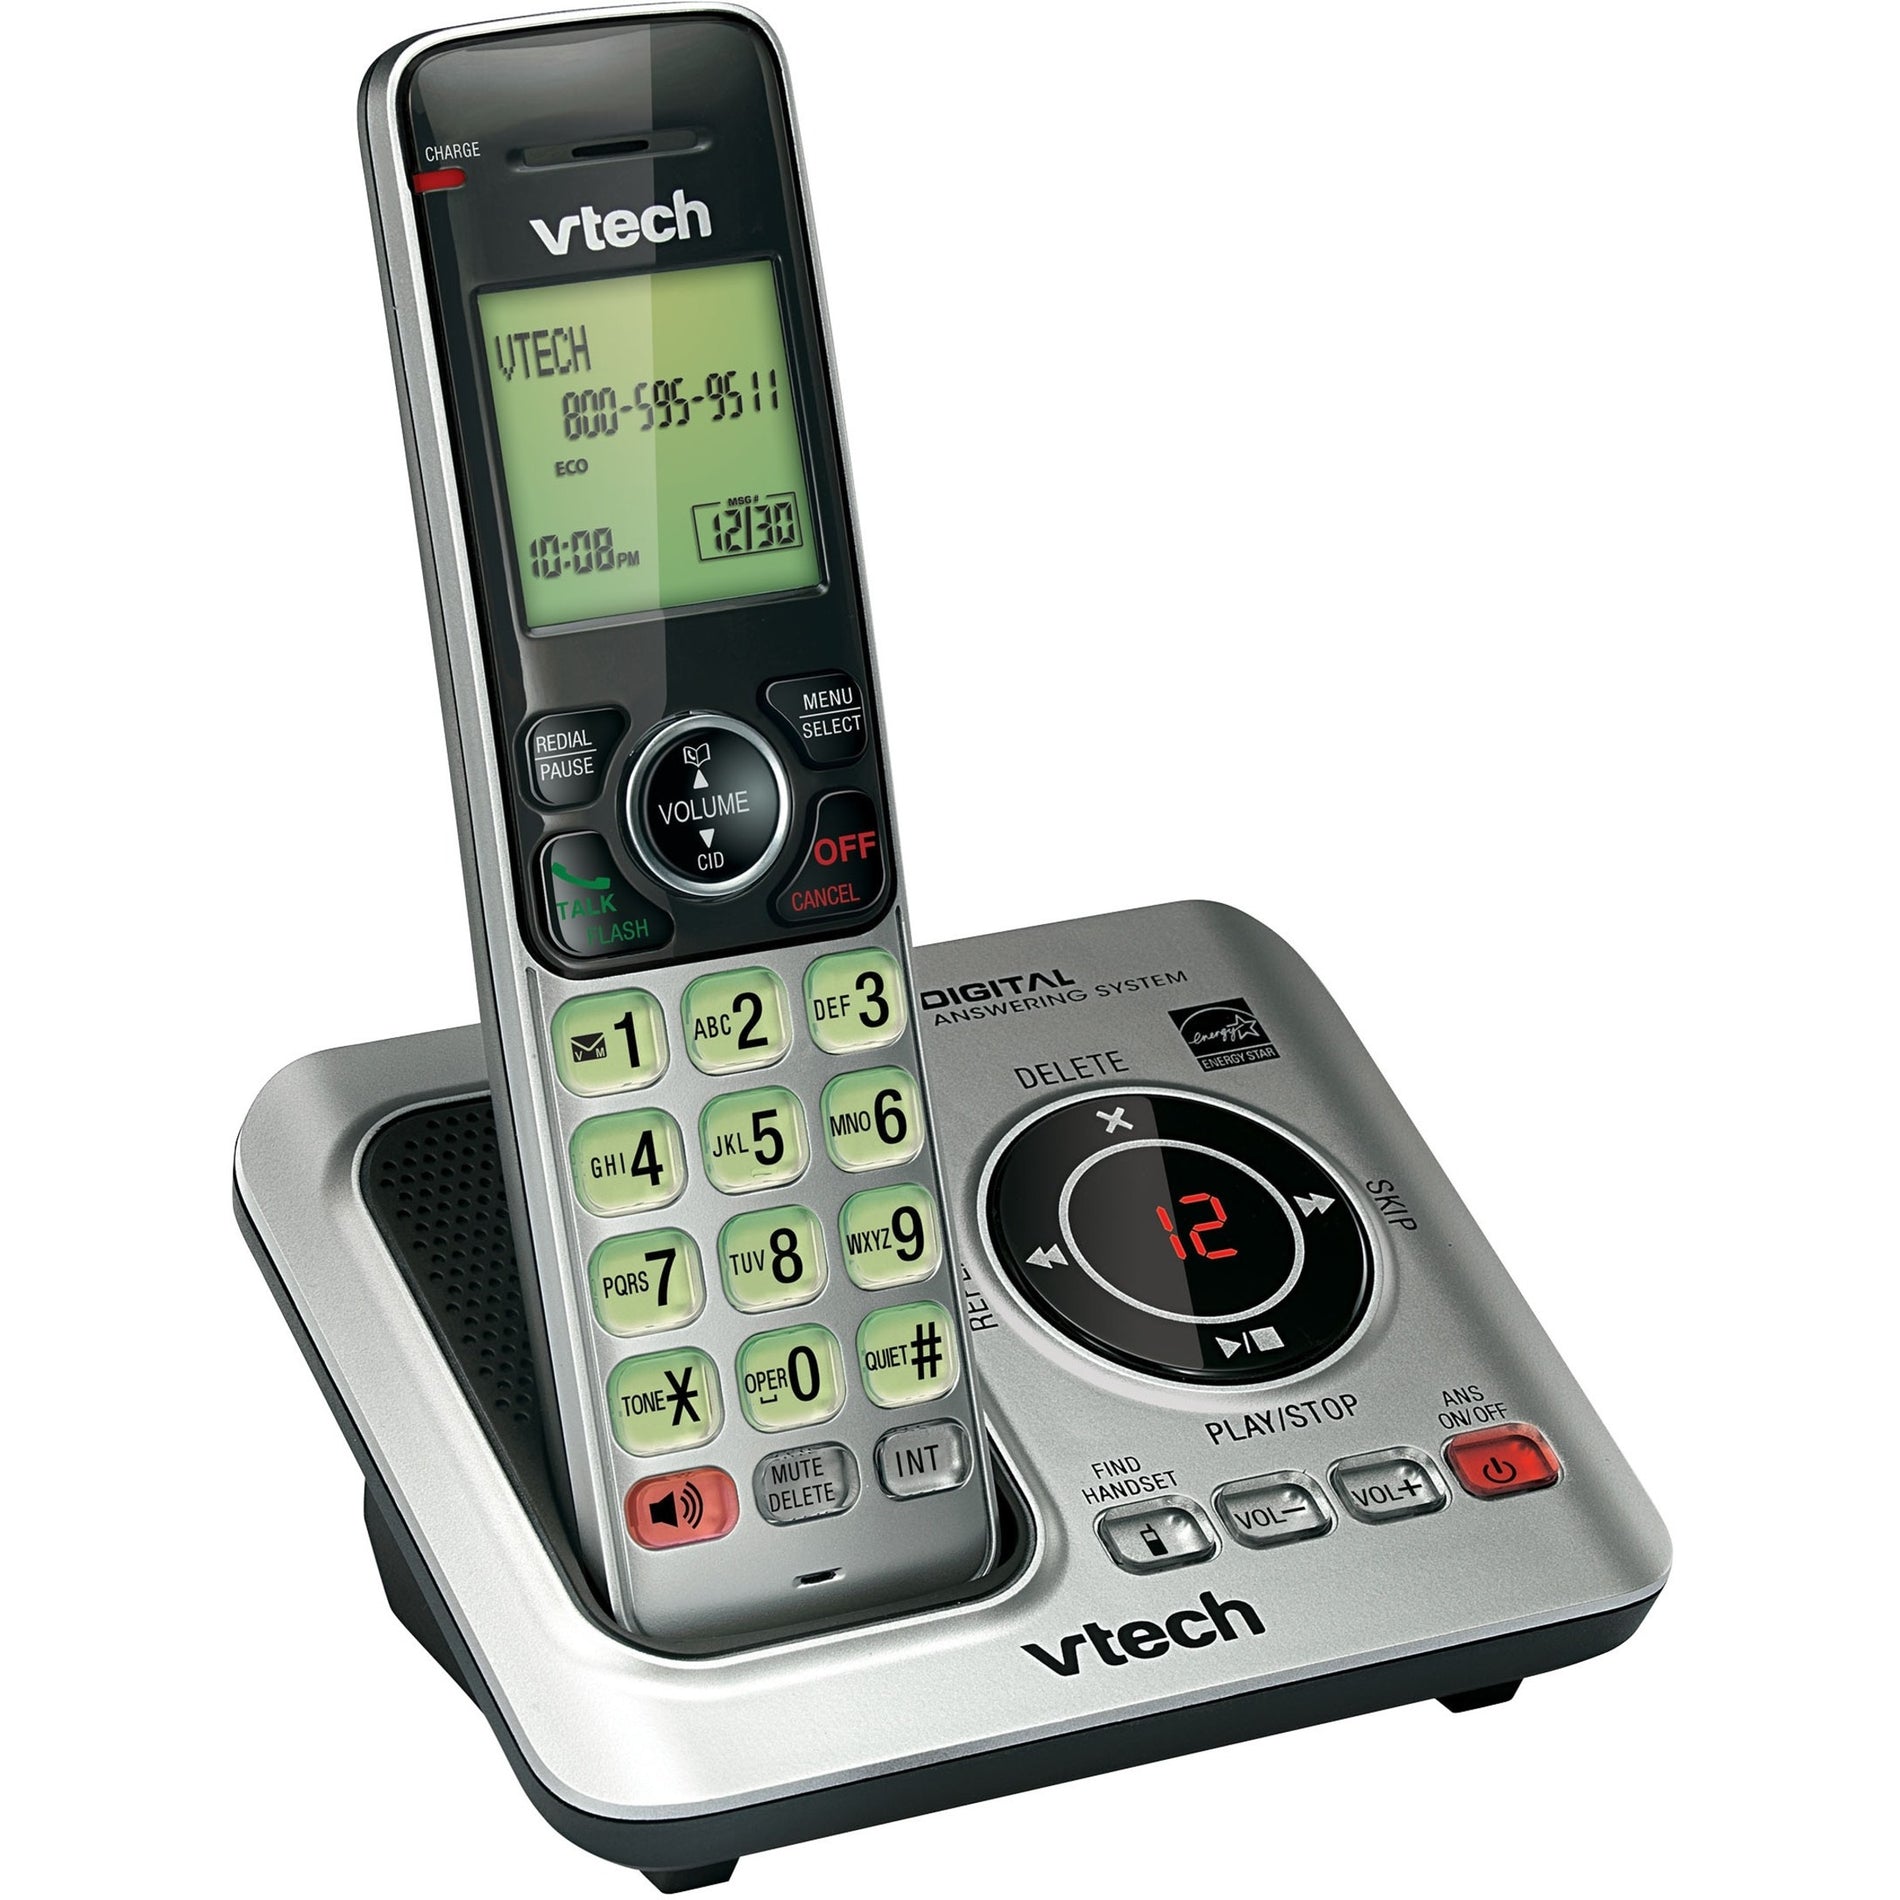 VTech CS6629 Cordless Answering System with Caller ID/Call Waiting, Expandable, Volume Control, Eco Mode